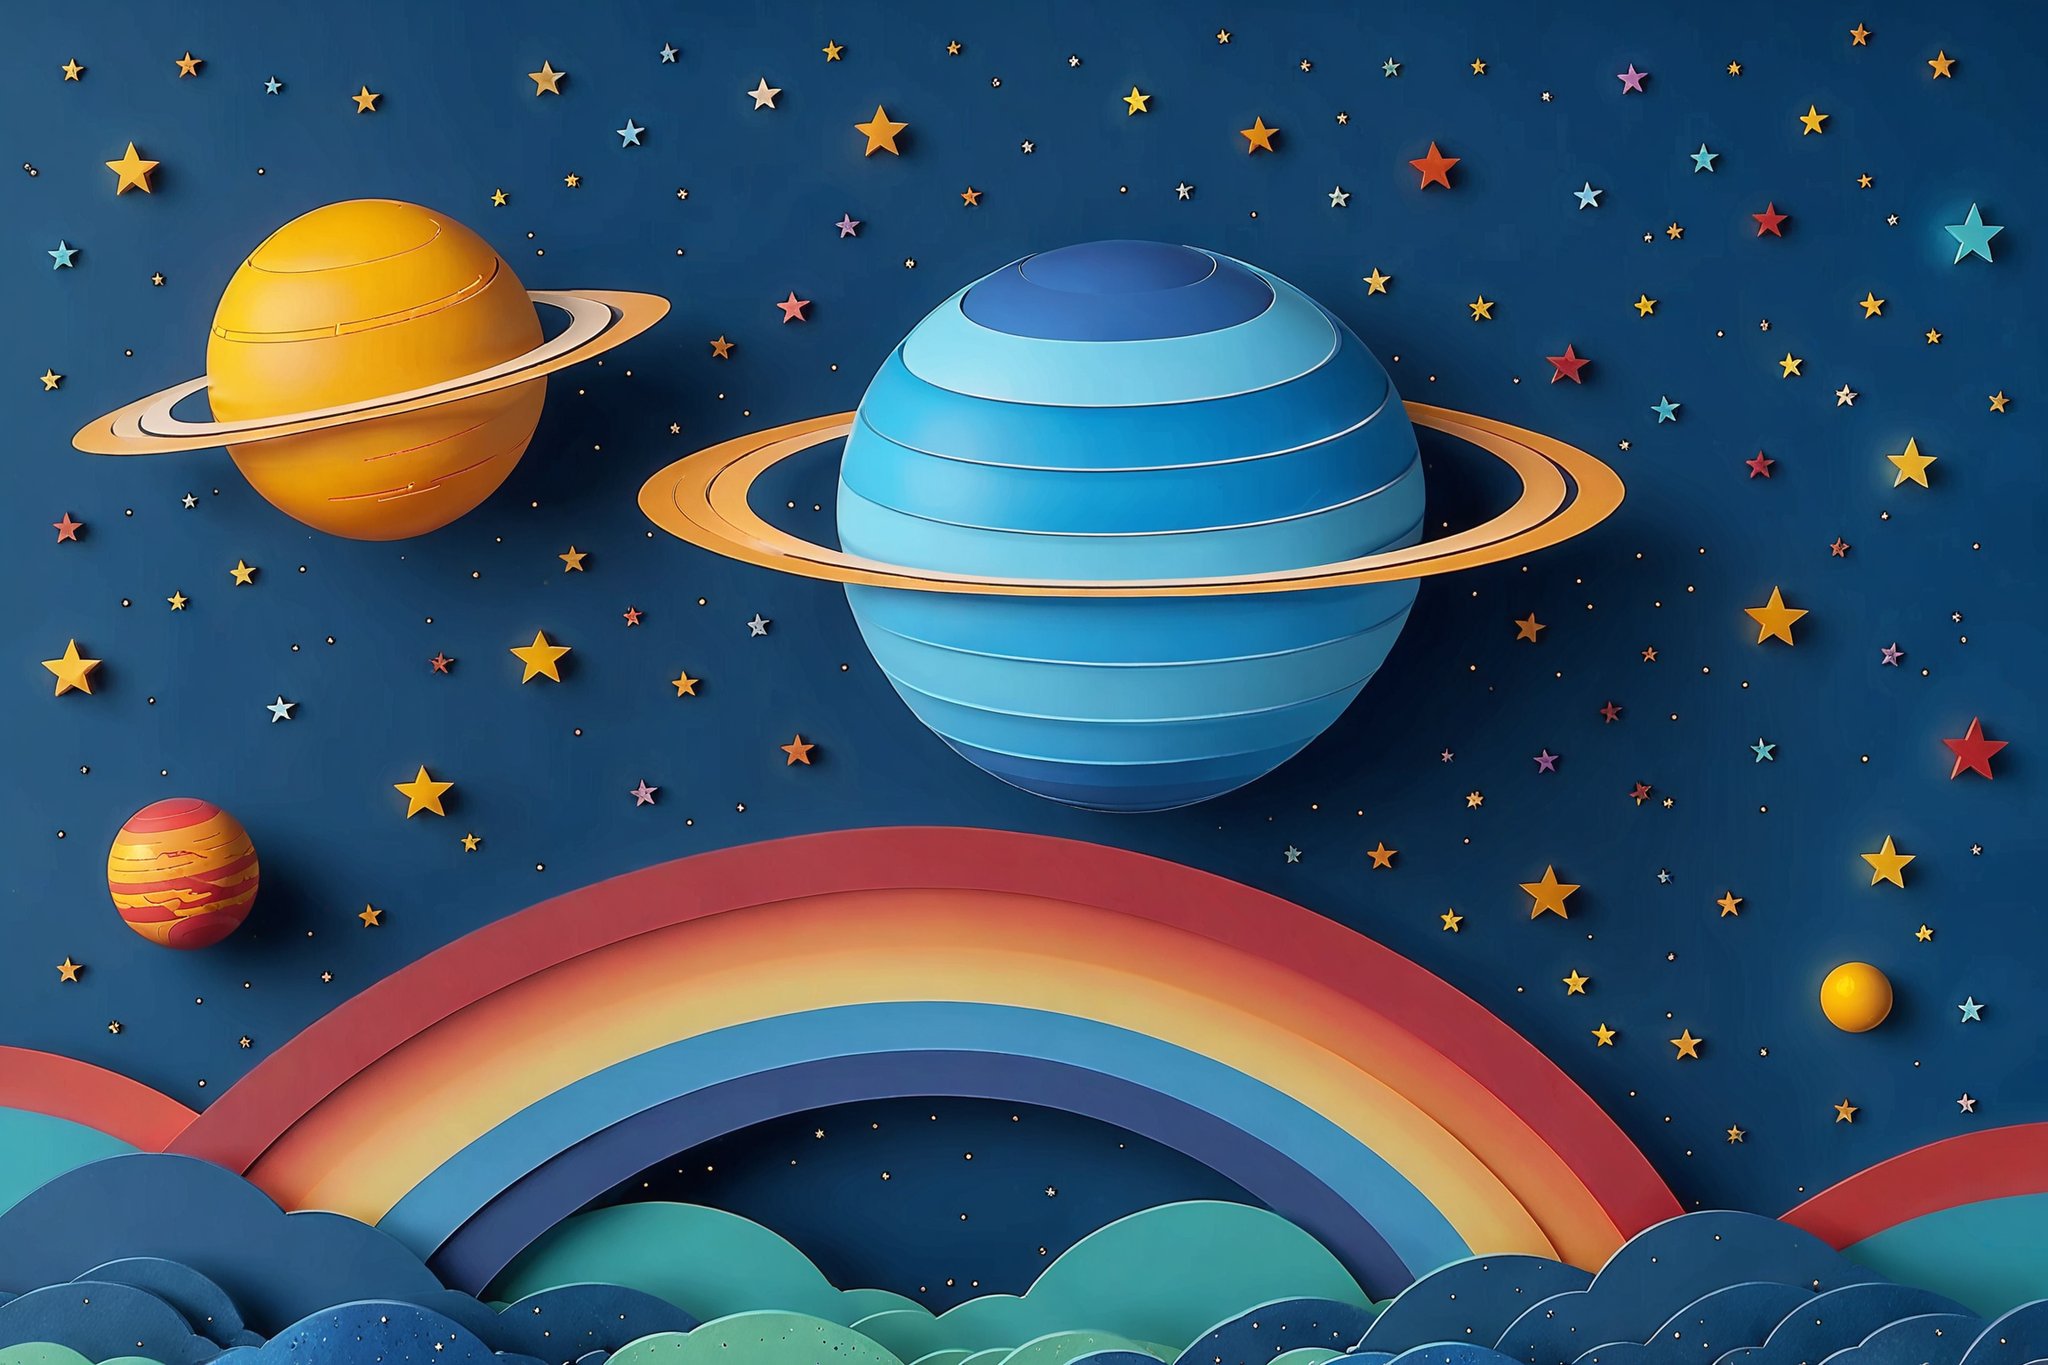 A vibrant cosmic scene. At the center, there's a large, layered planet with blue stripes, surrounded by a ring. Above the planet, the vast expanse of space is dotted with numerous stars. Below the planet, a multi-layered, colorful rainbow arches gracefully, with clouds of varying shades of blue at its base. The overall color palette is rich, with deep blues, bright yellows, and radiant reds dominating the scene.